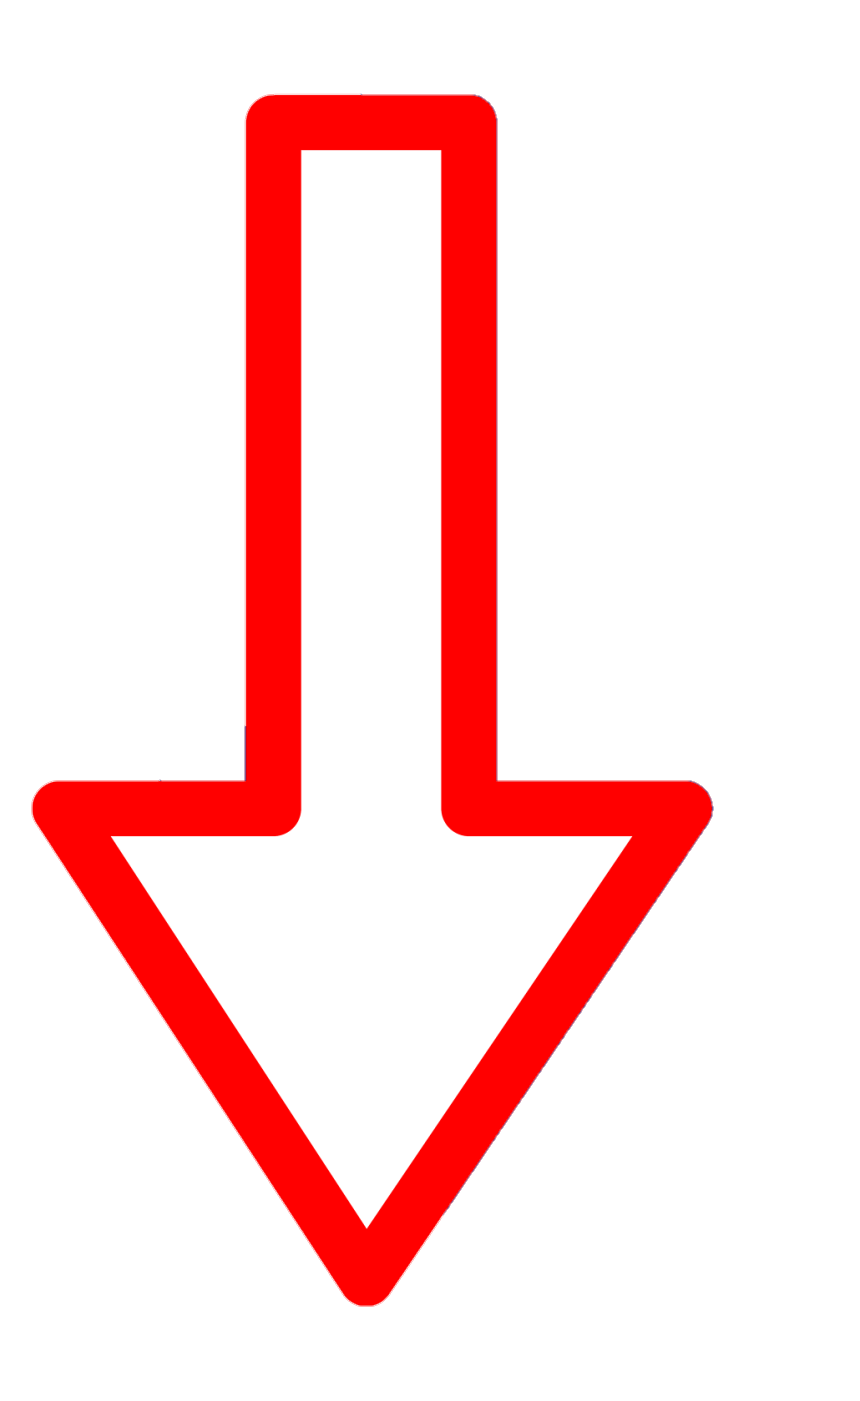 red-arrow-png-from-pngfre-17